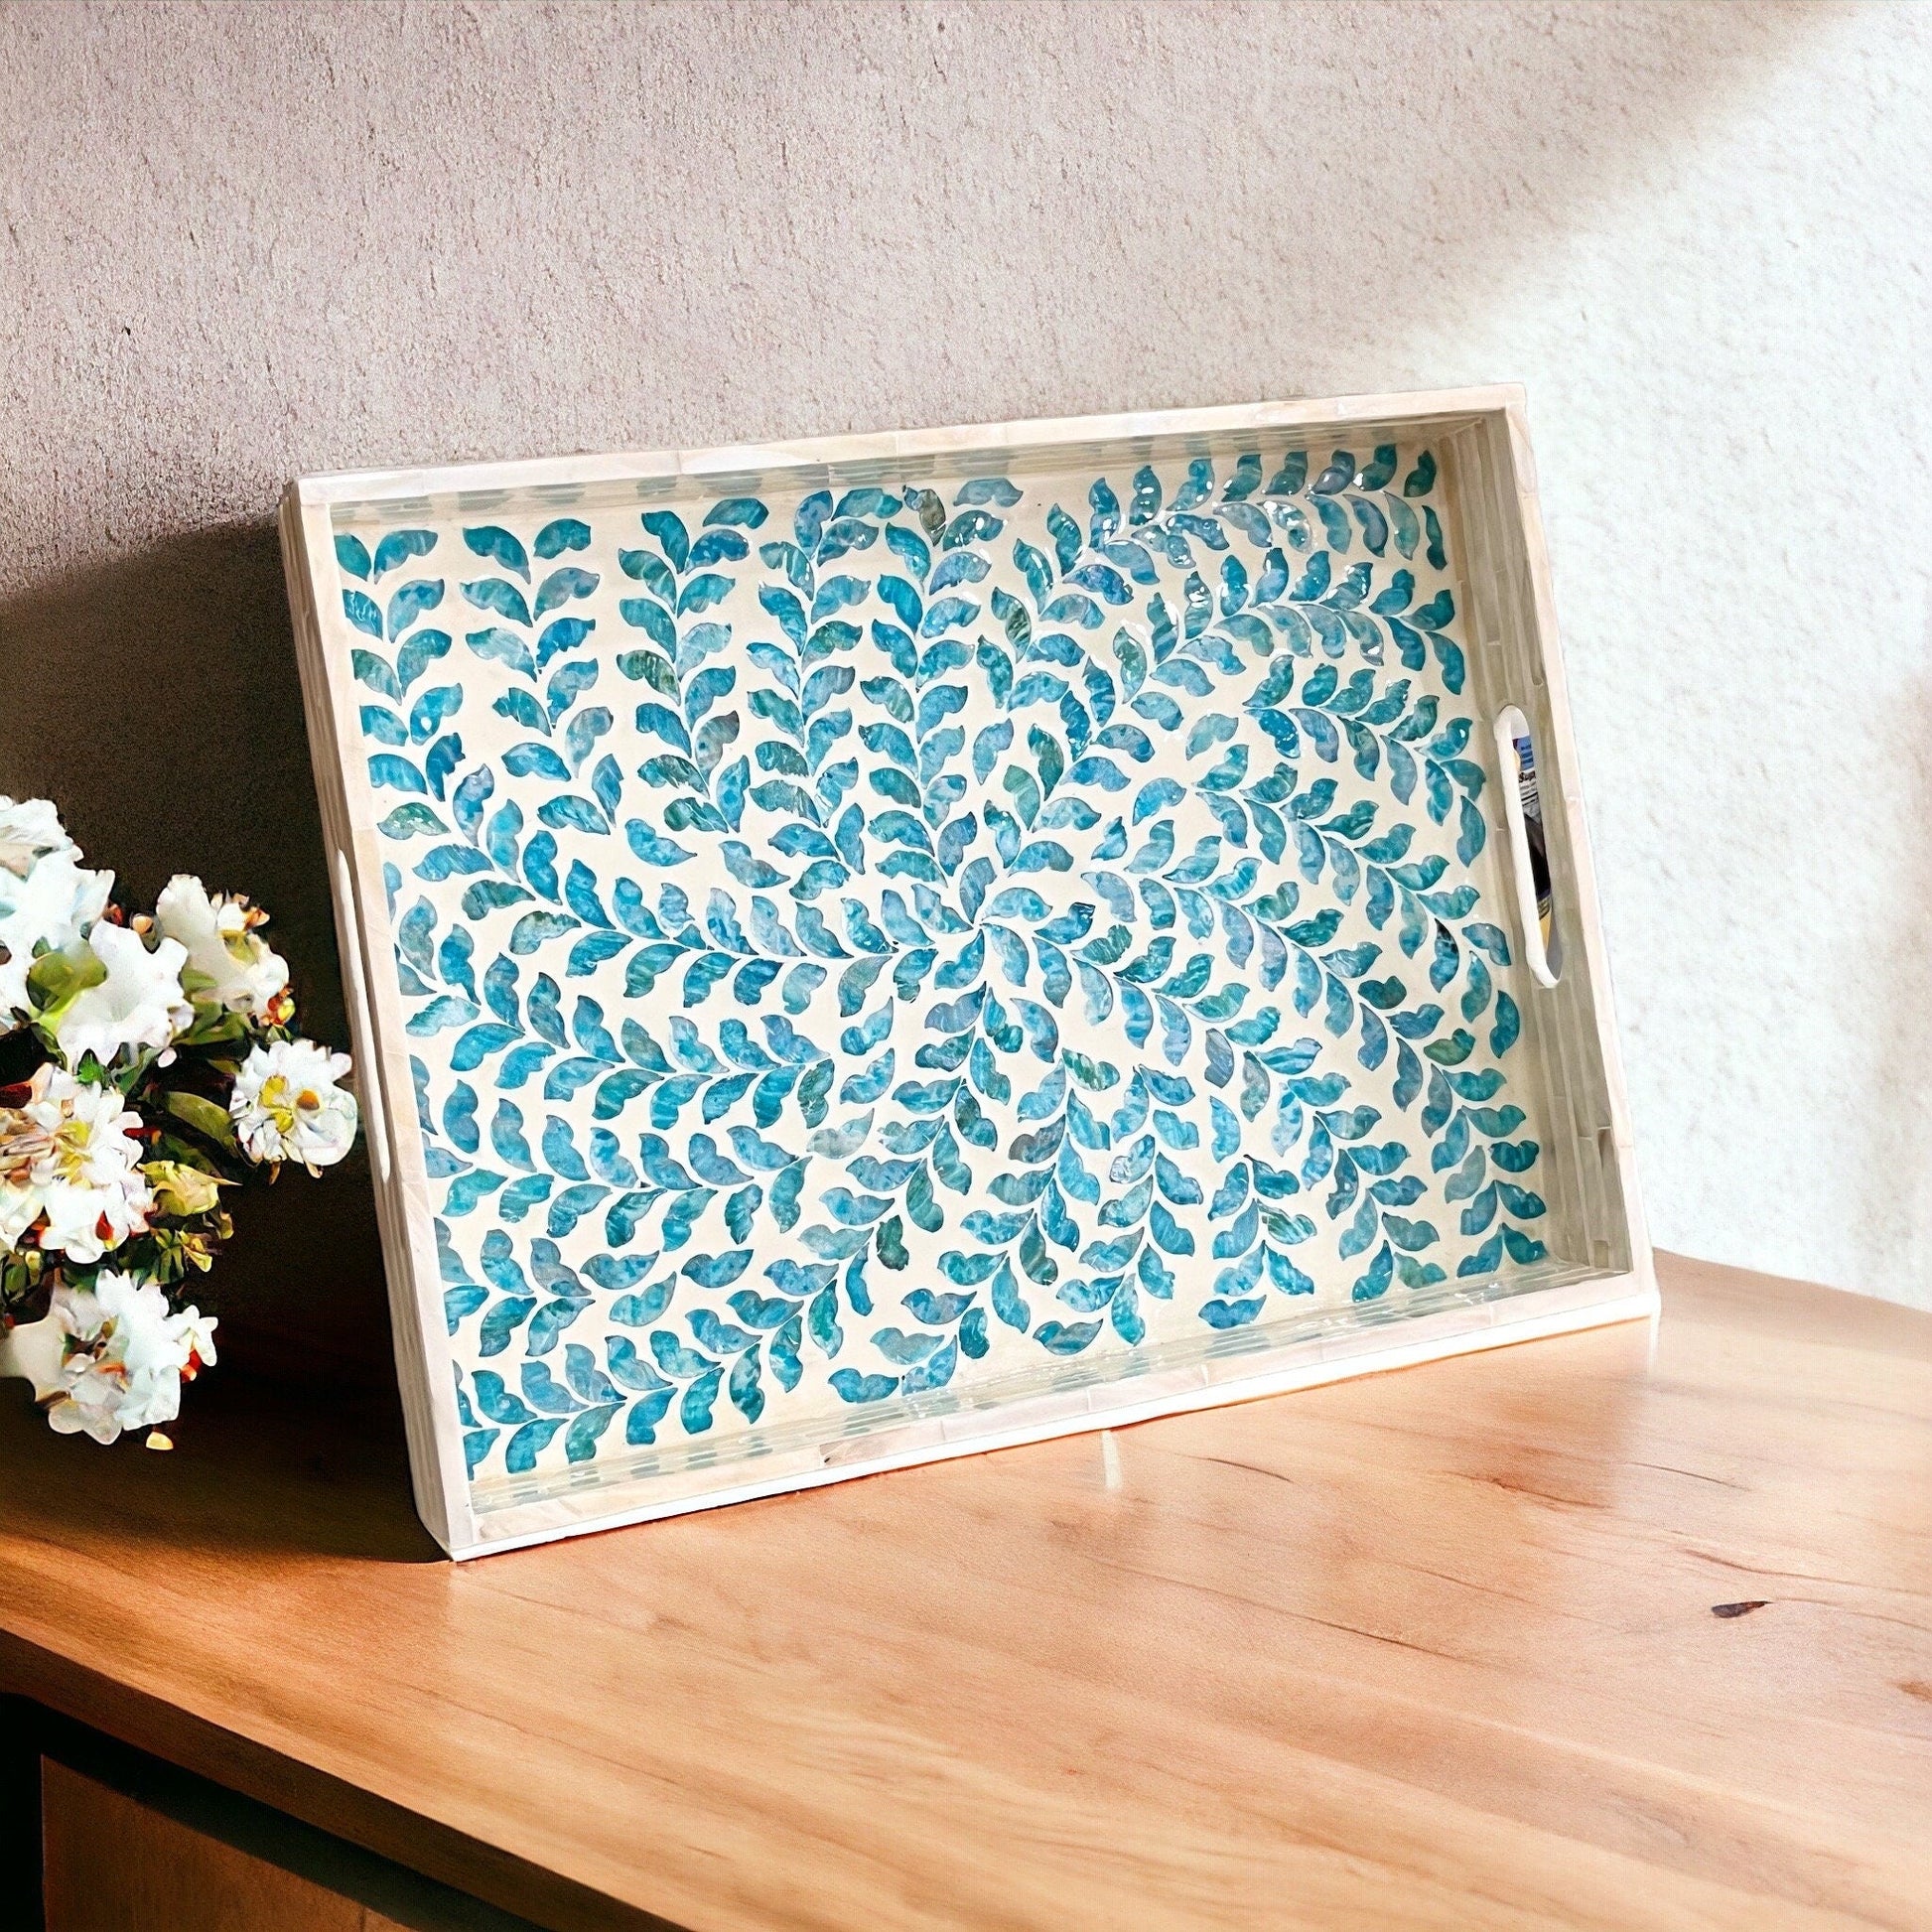 Mother Pearl Rectangular Serving Tray, Decorative tray, Blue leaves patternBBDecorHouseSize S